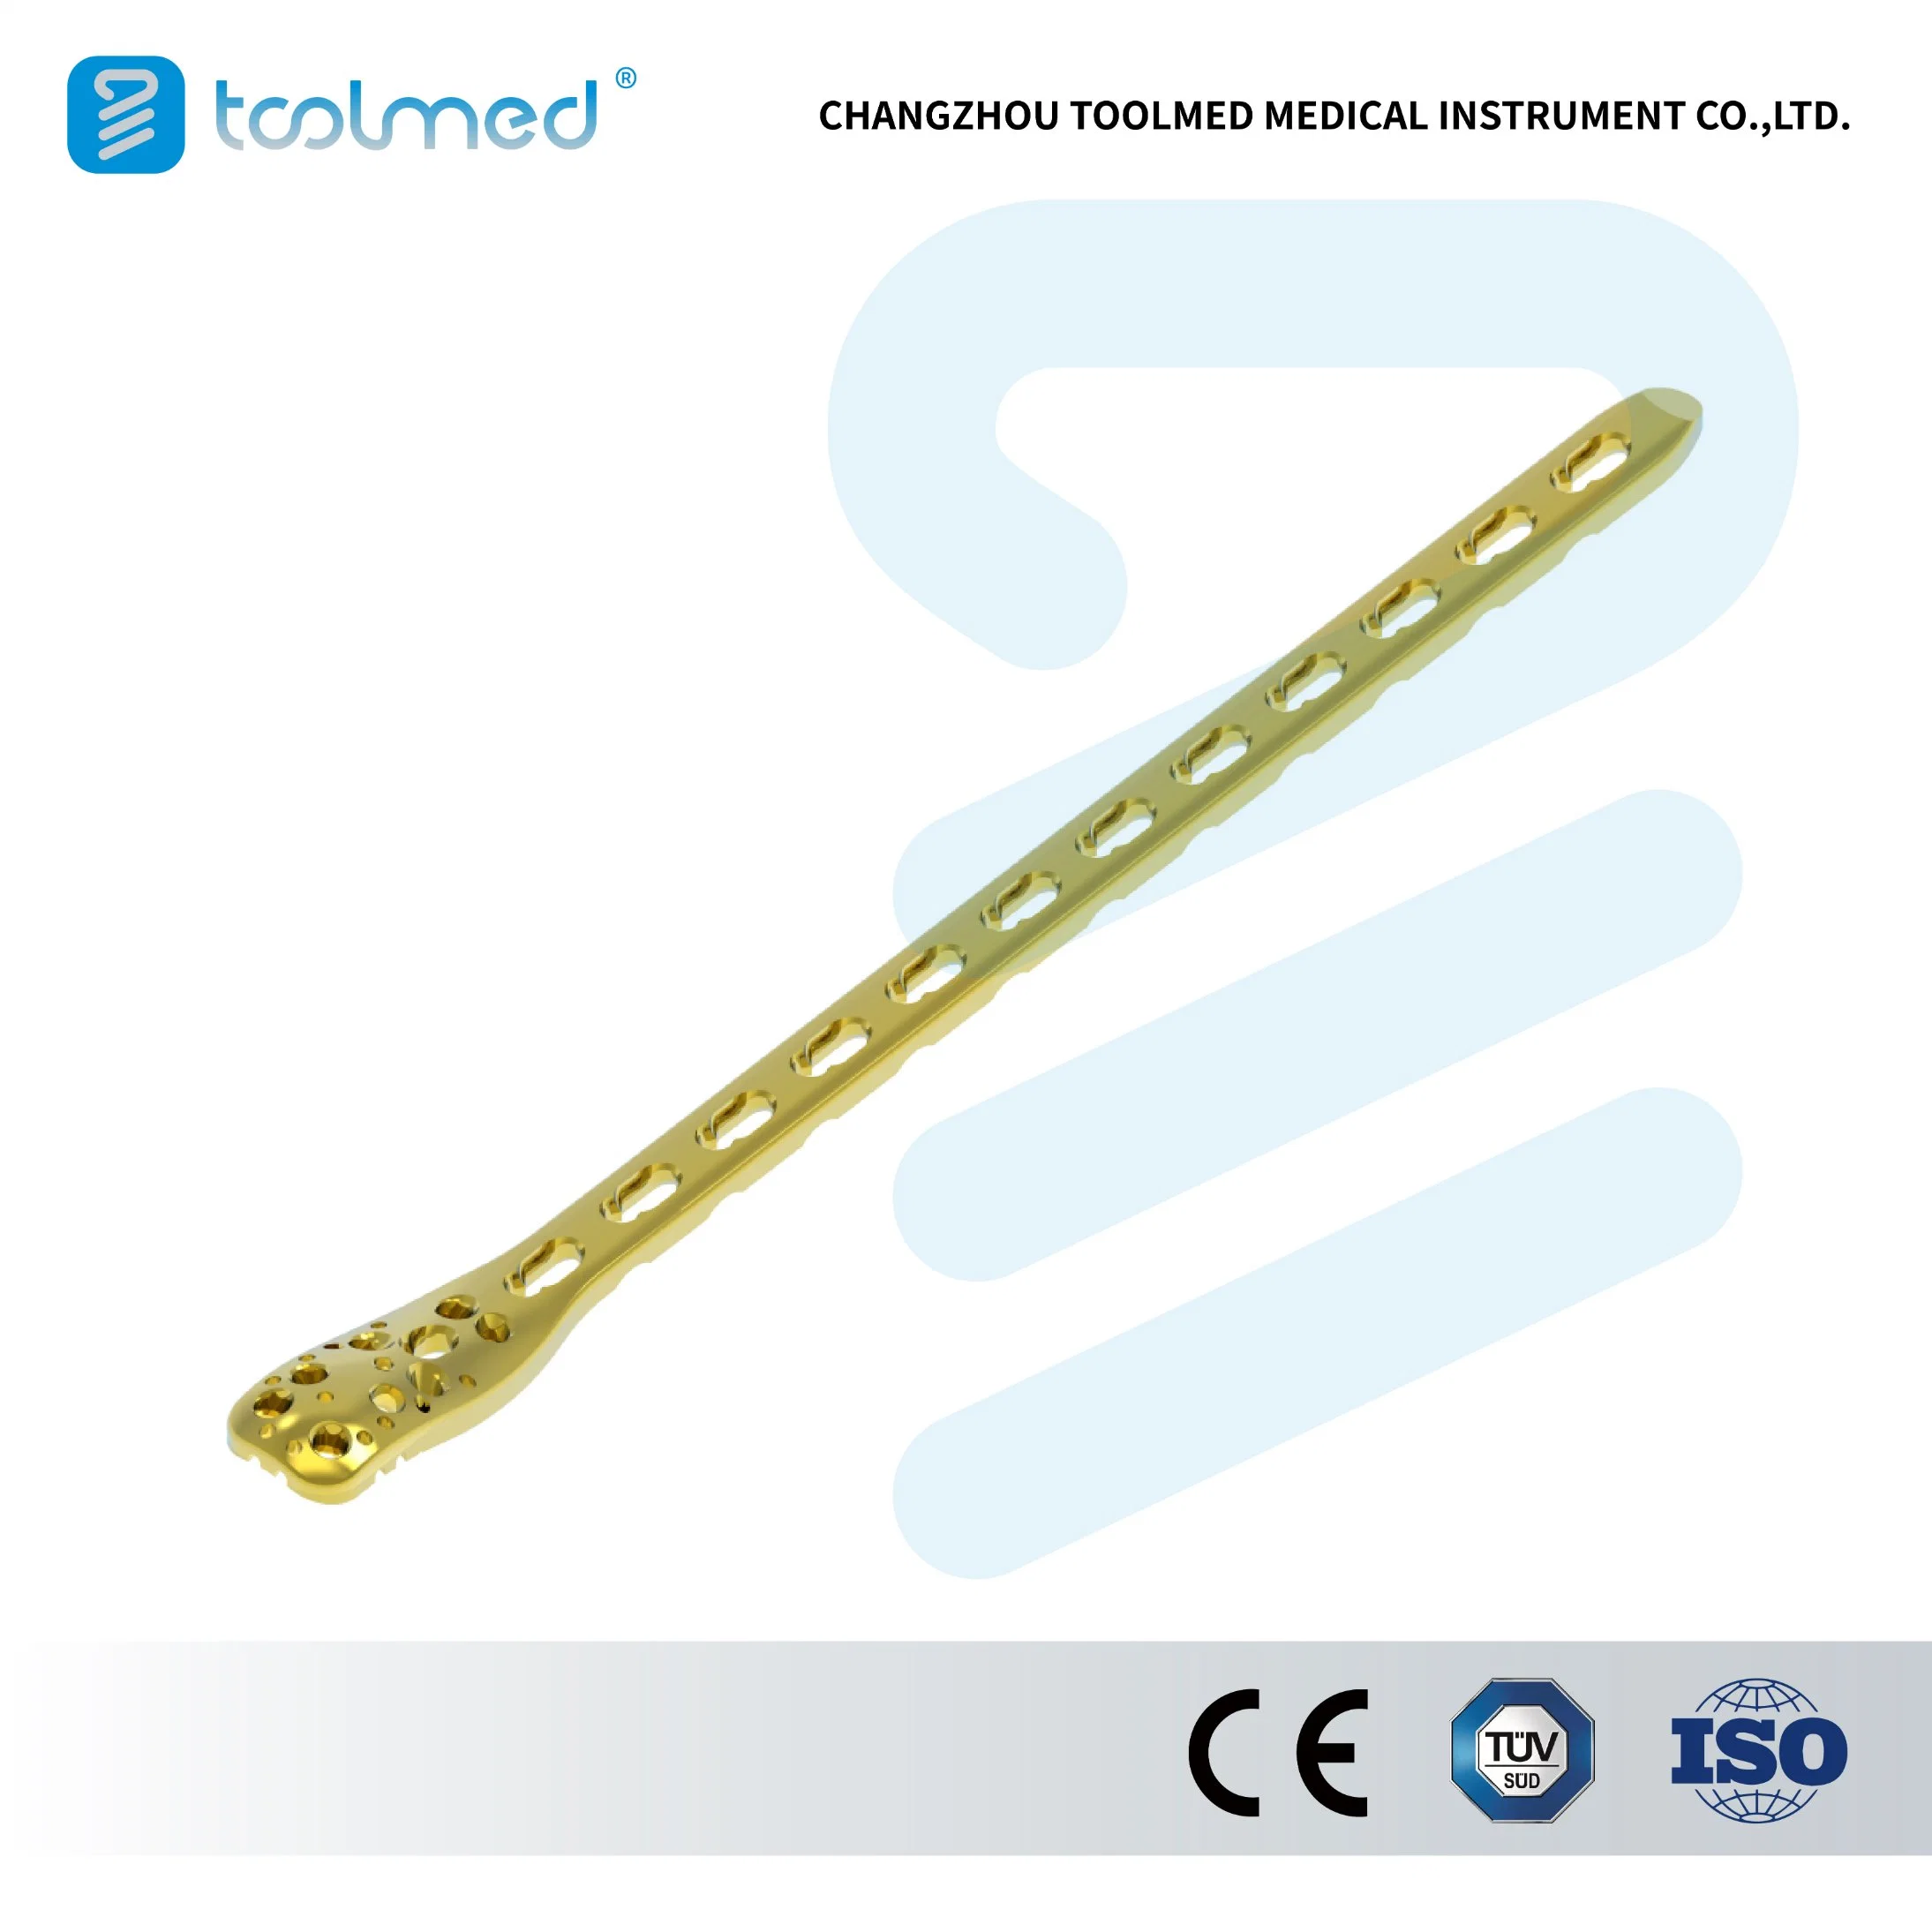 Long Proximal Humeral Locking Compression Bone Plate, Small Fragment LCP System, Titanium, Orthopedic Surgical Implant for Trauma Surgery, Medical Products CE